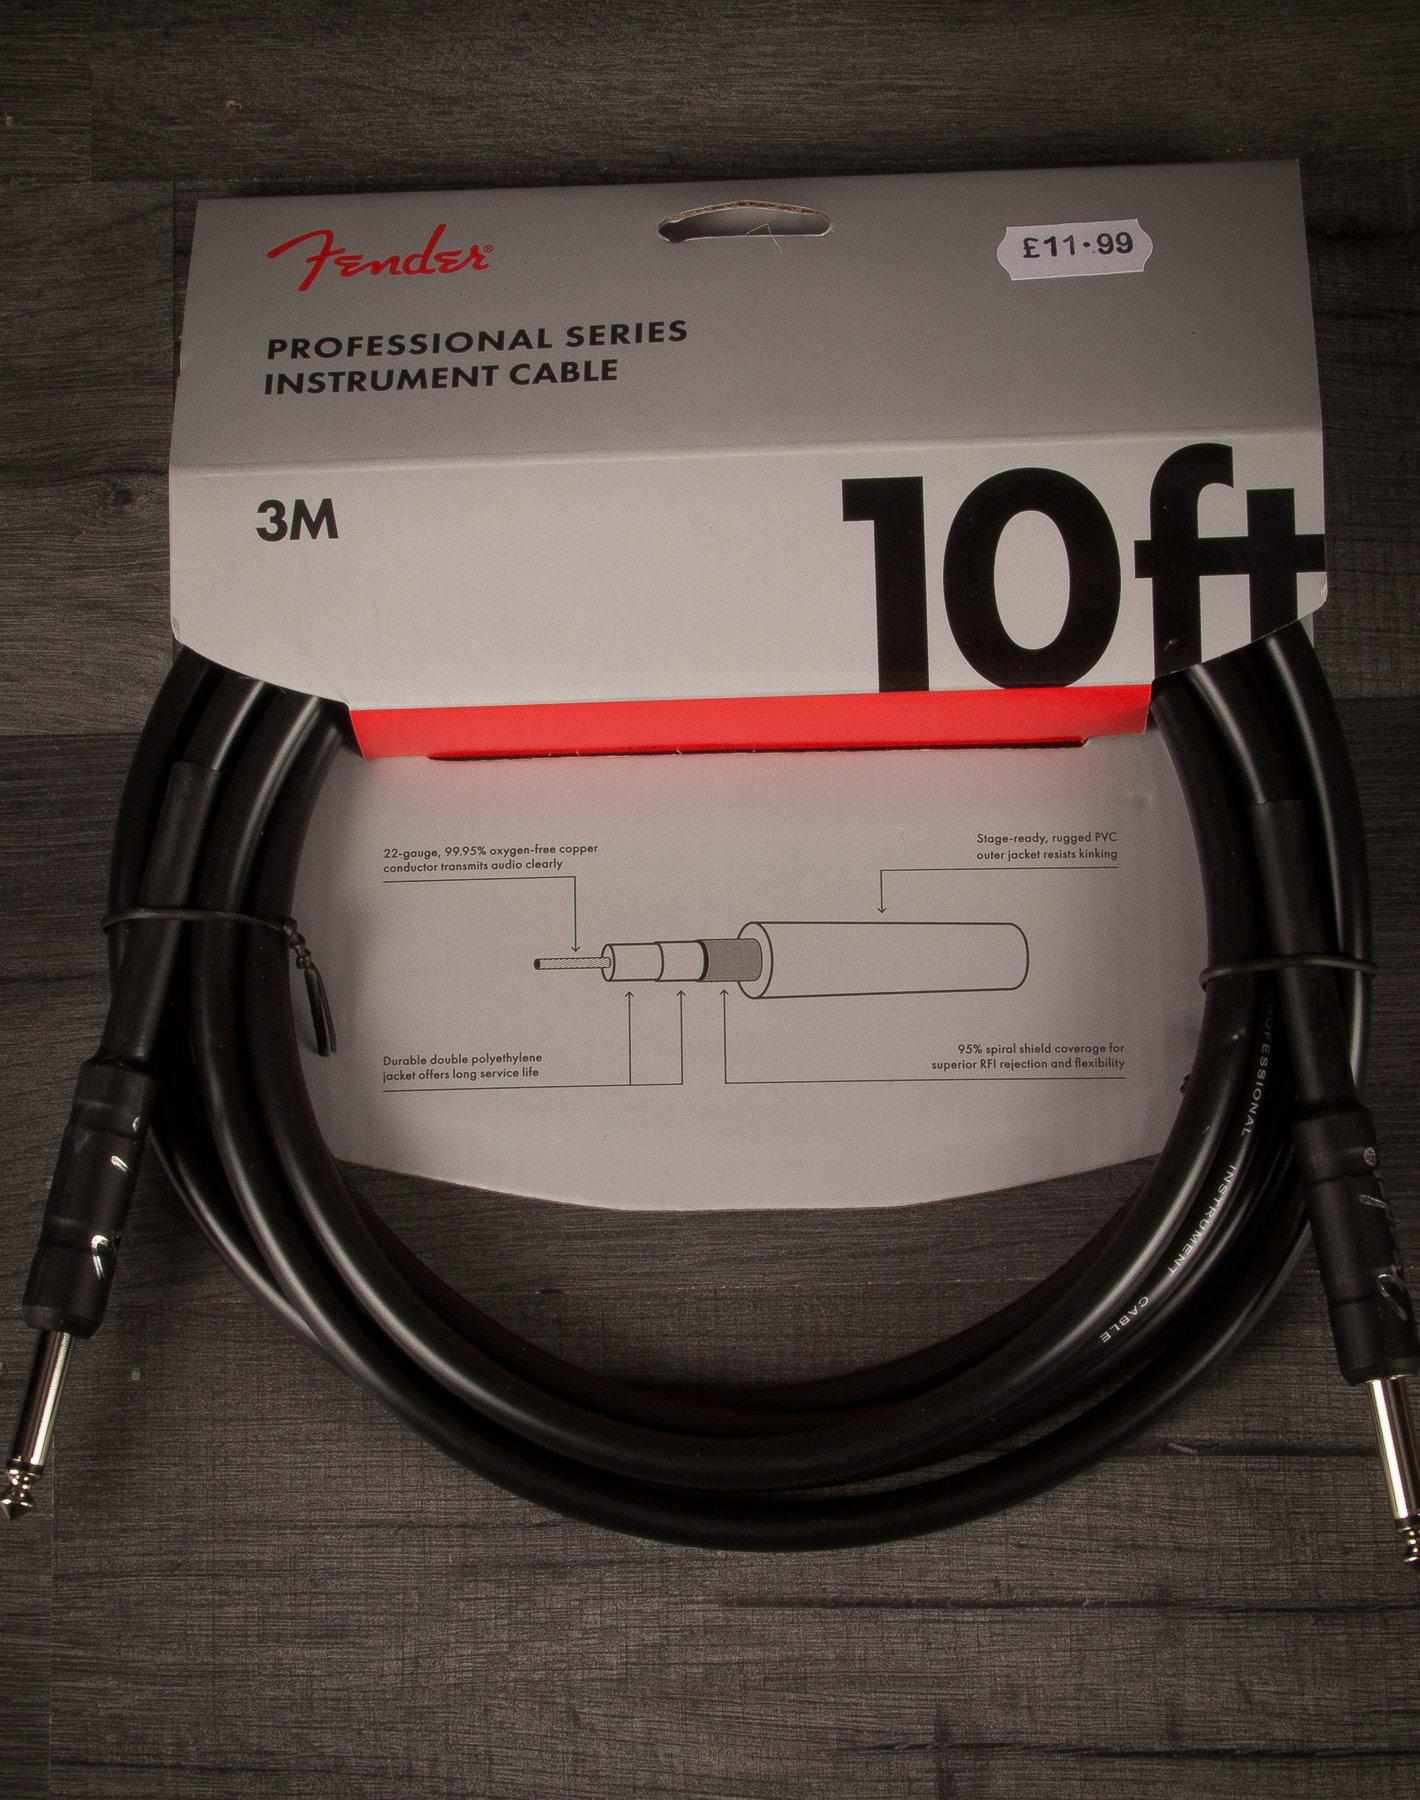 Fender Accessories Fender Professional Series Instrument Cable 10 Foot Black